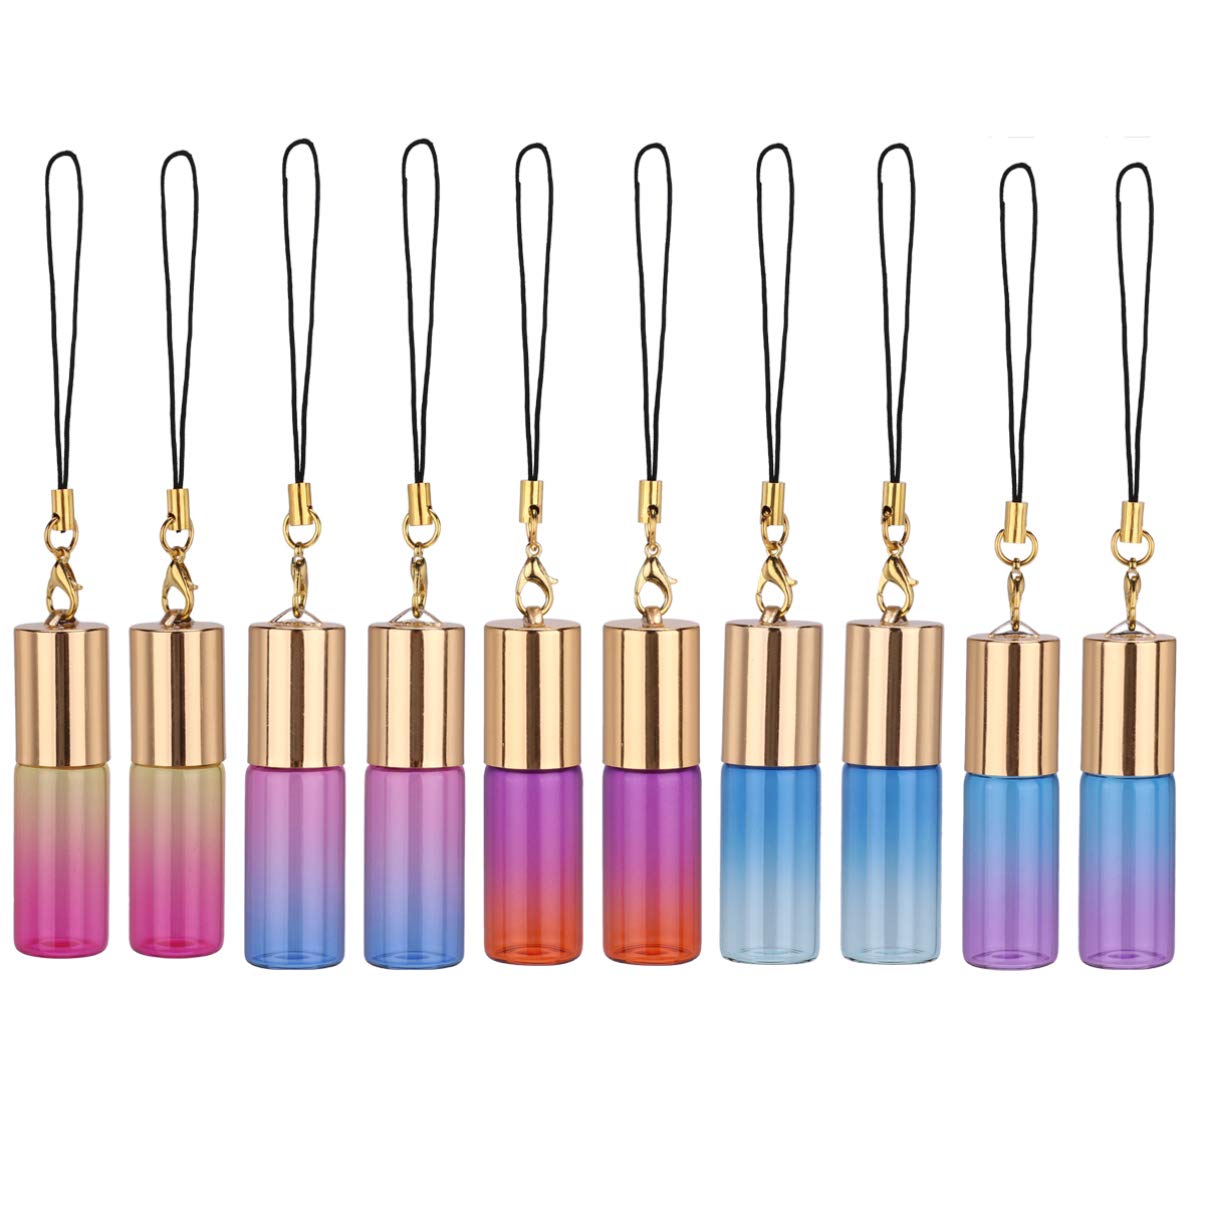 FRCOLOR 10pcs Glass Roller Bottles with Keychain Empty Refillable Roll on Bottles Rollerball Bottle for Essential Oil Perfume